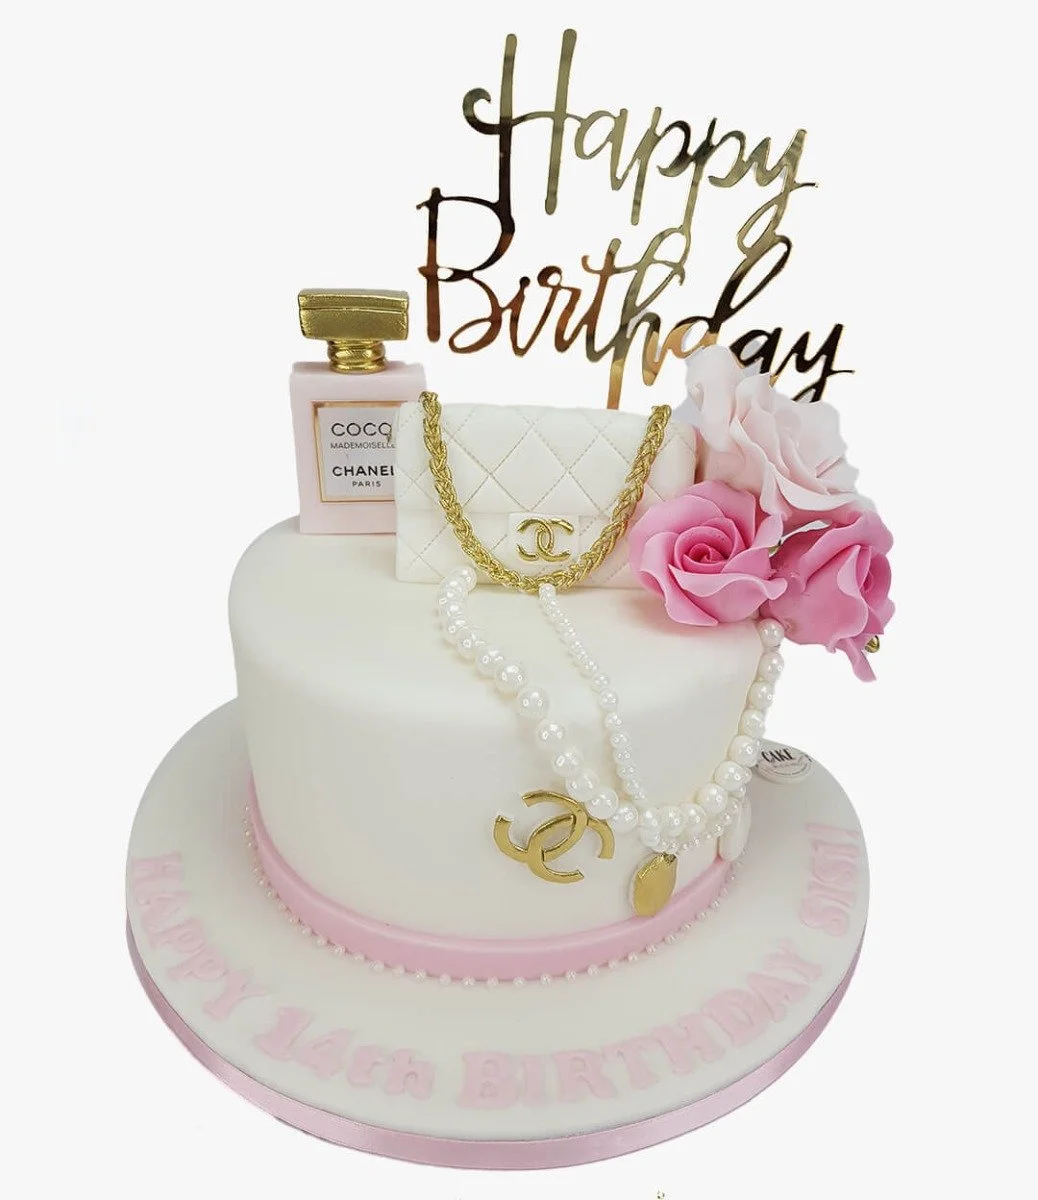 All things Chanel Cake By Cake Social